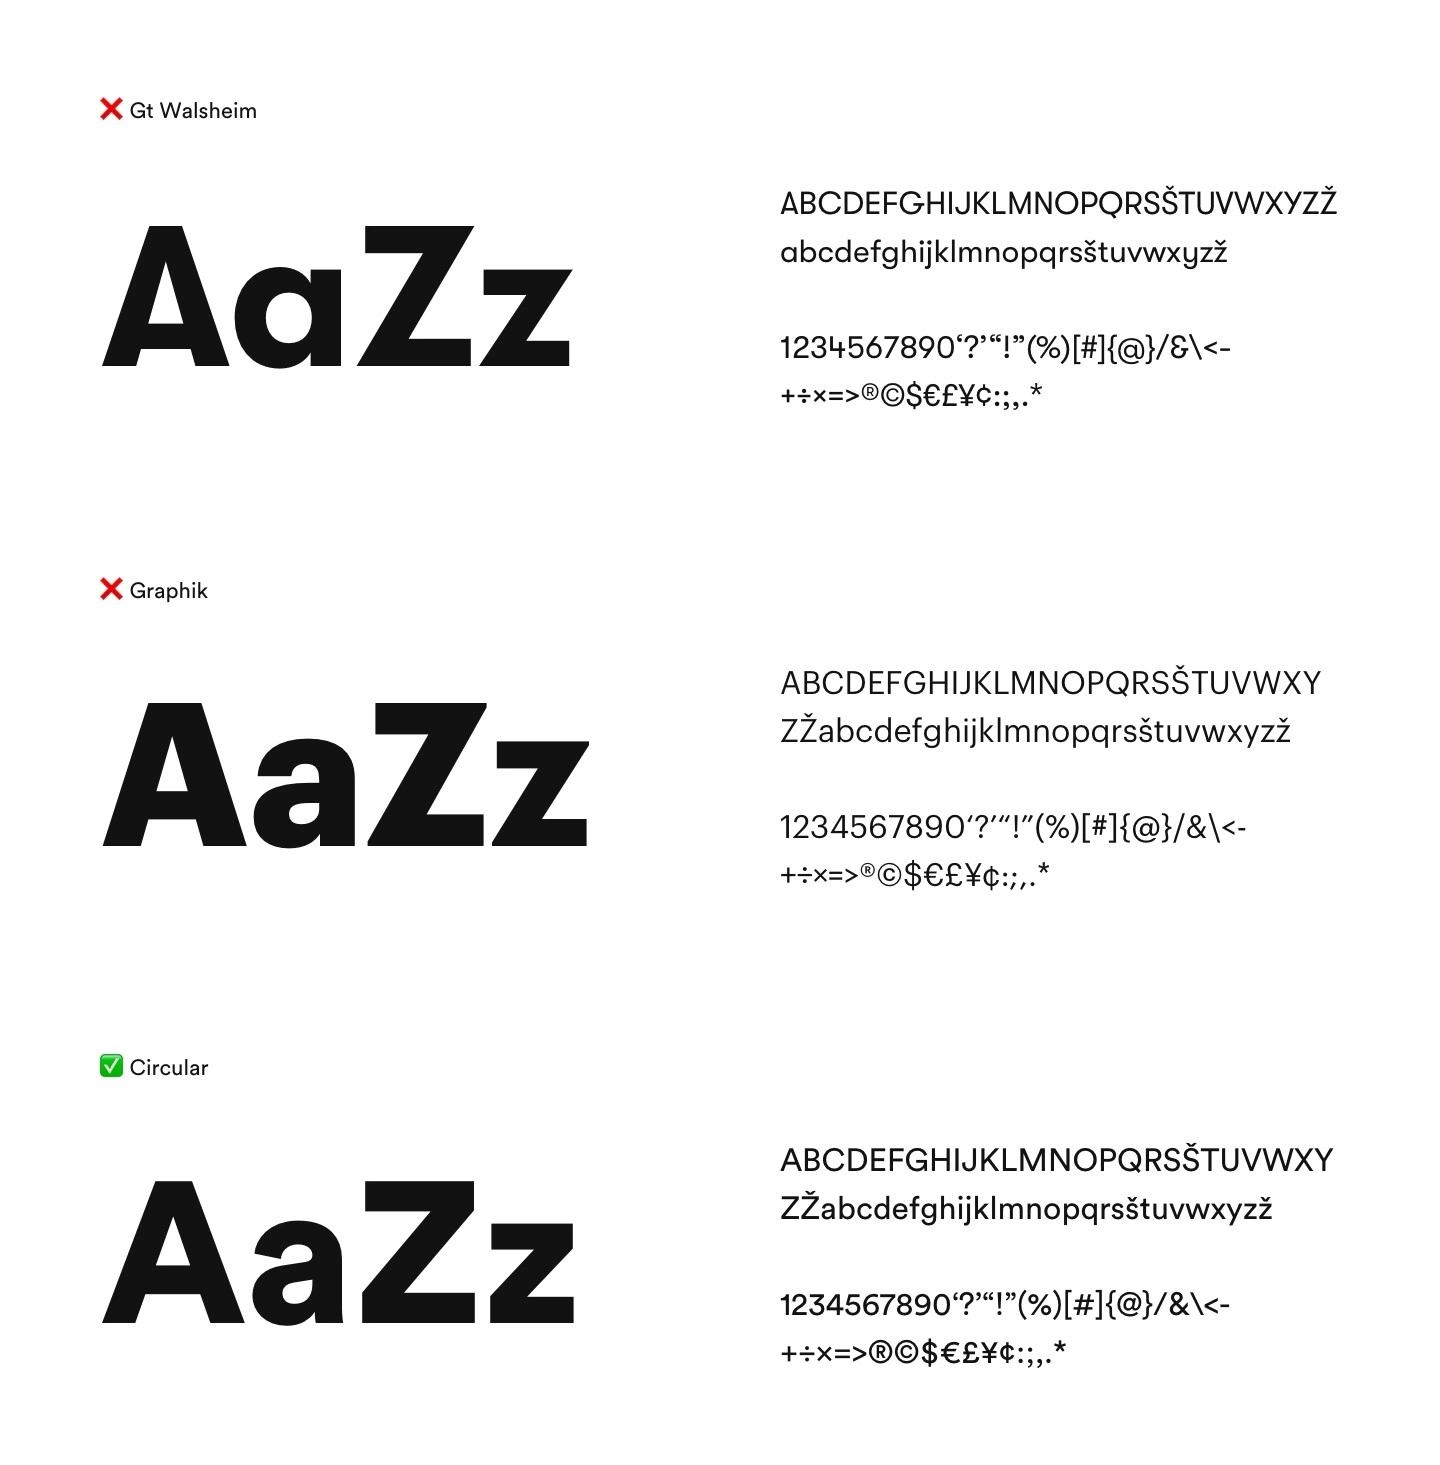 Typography. Letters of different sizes shown in the image